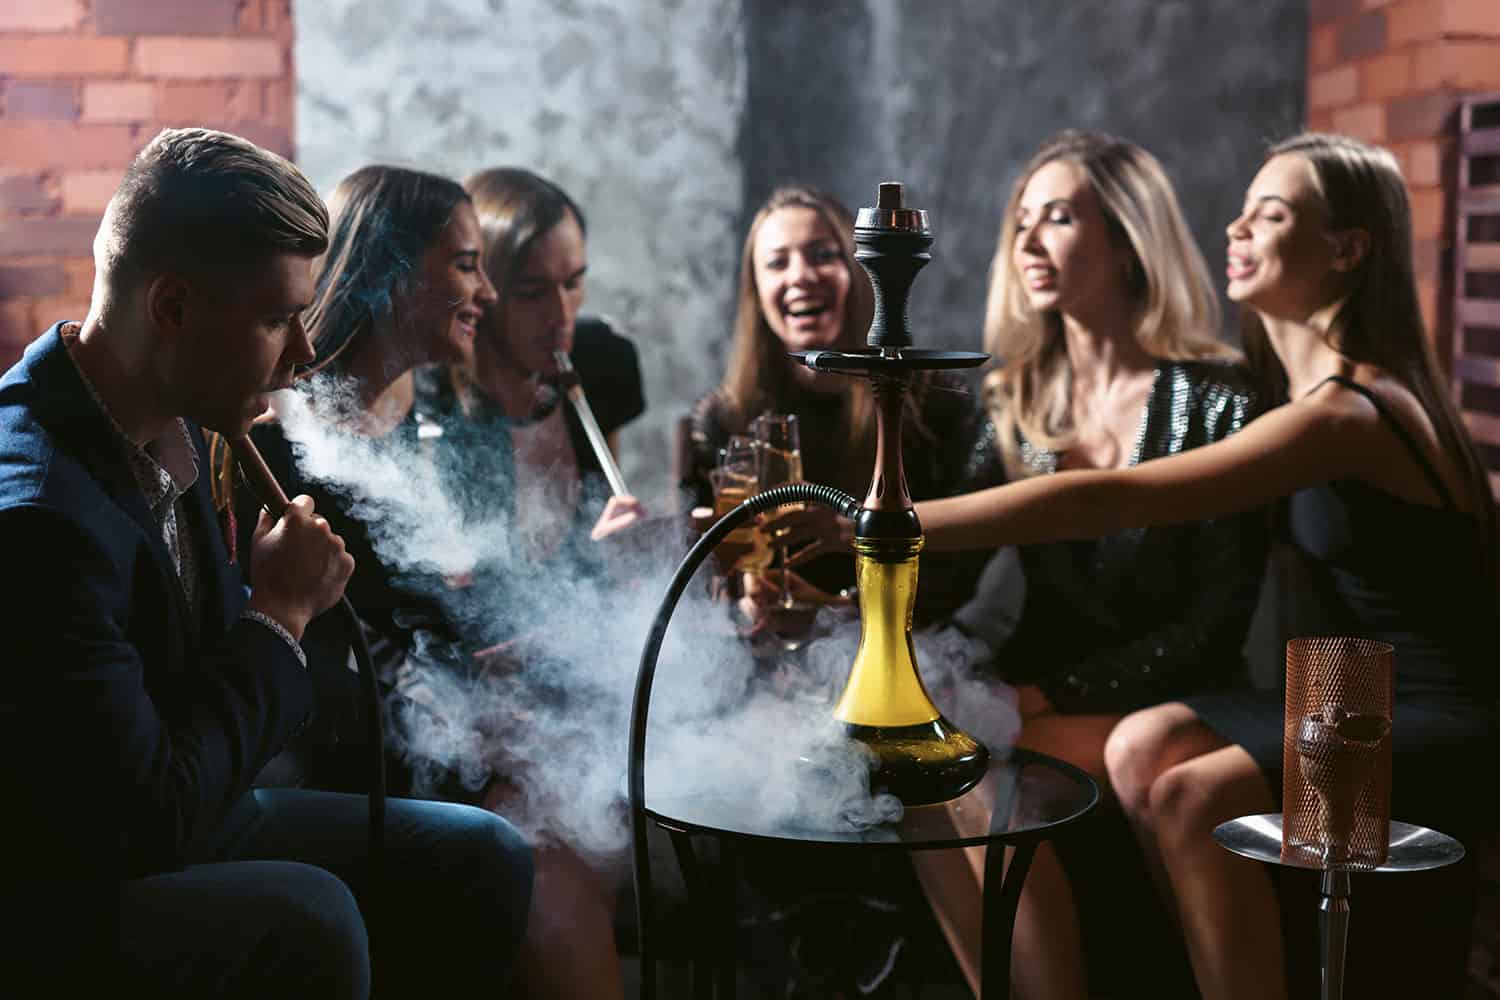 Pic: photo of several young people sitting around a table smoking shisha and drinking alcohol.